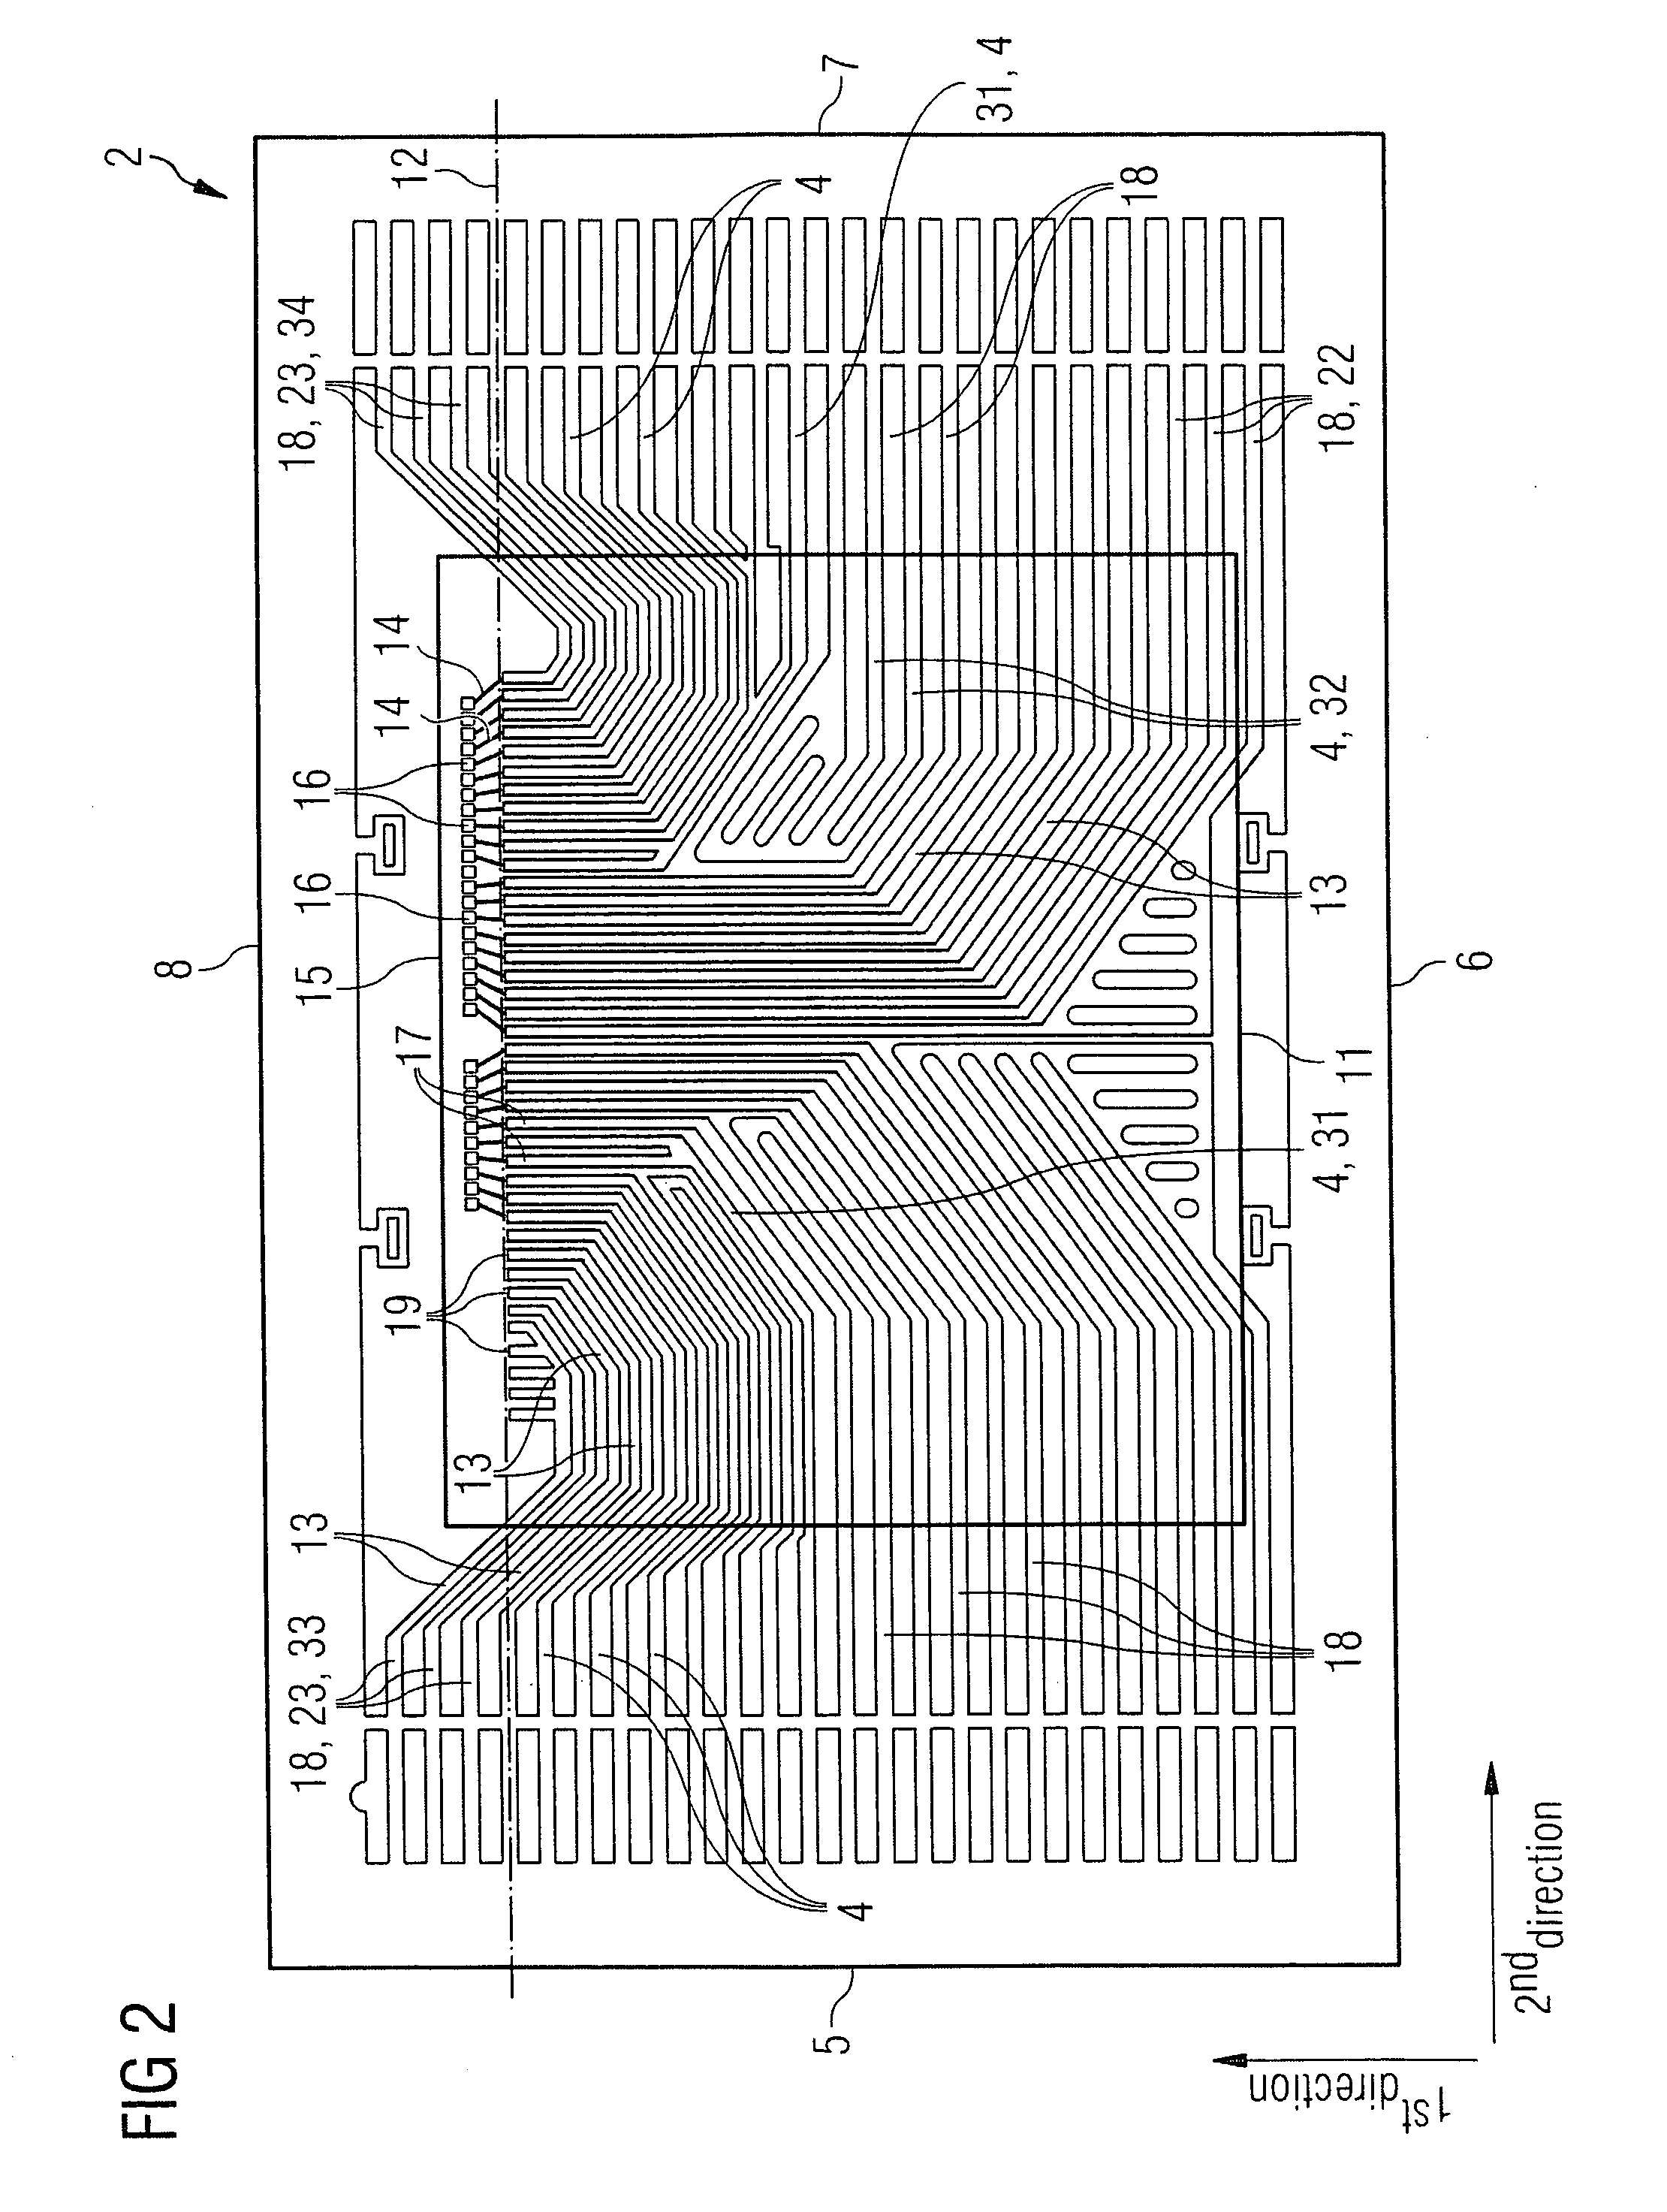 Semiconductor package based on lead-on-chip architecture, the fabrication thereof and a leadframe for implementing in a semiconductor package